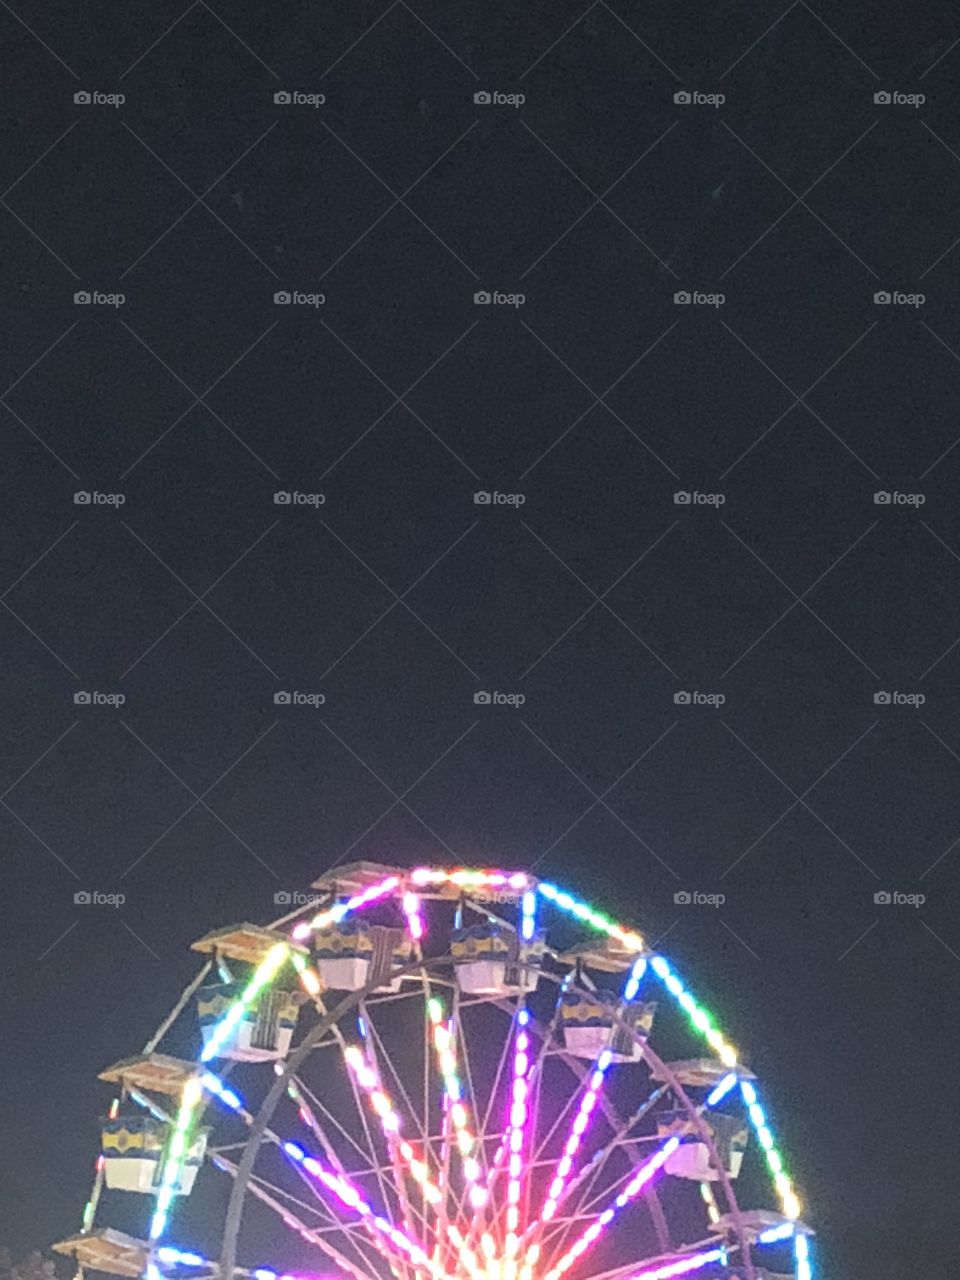 Top of the wheel at night